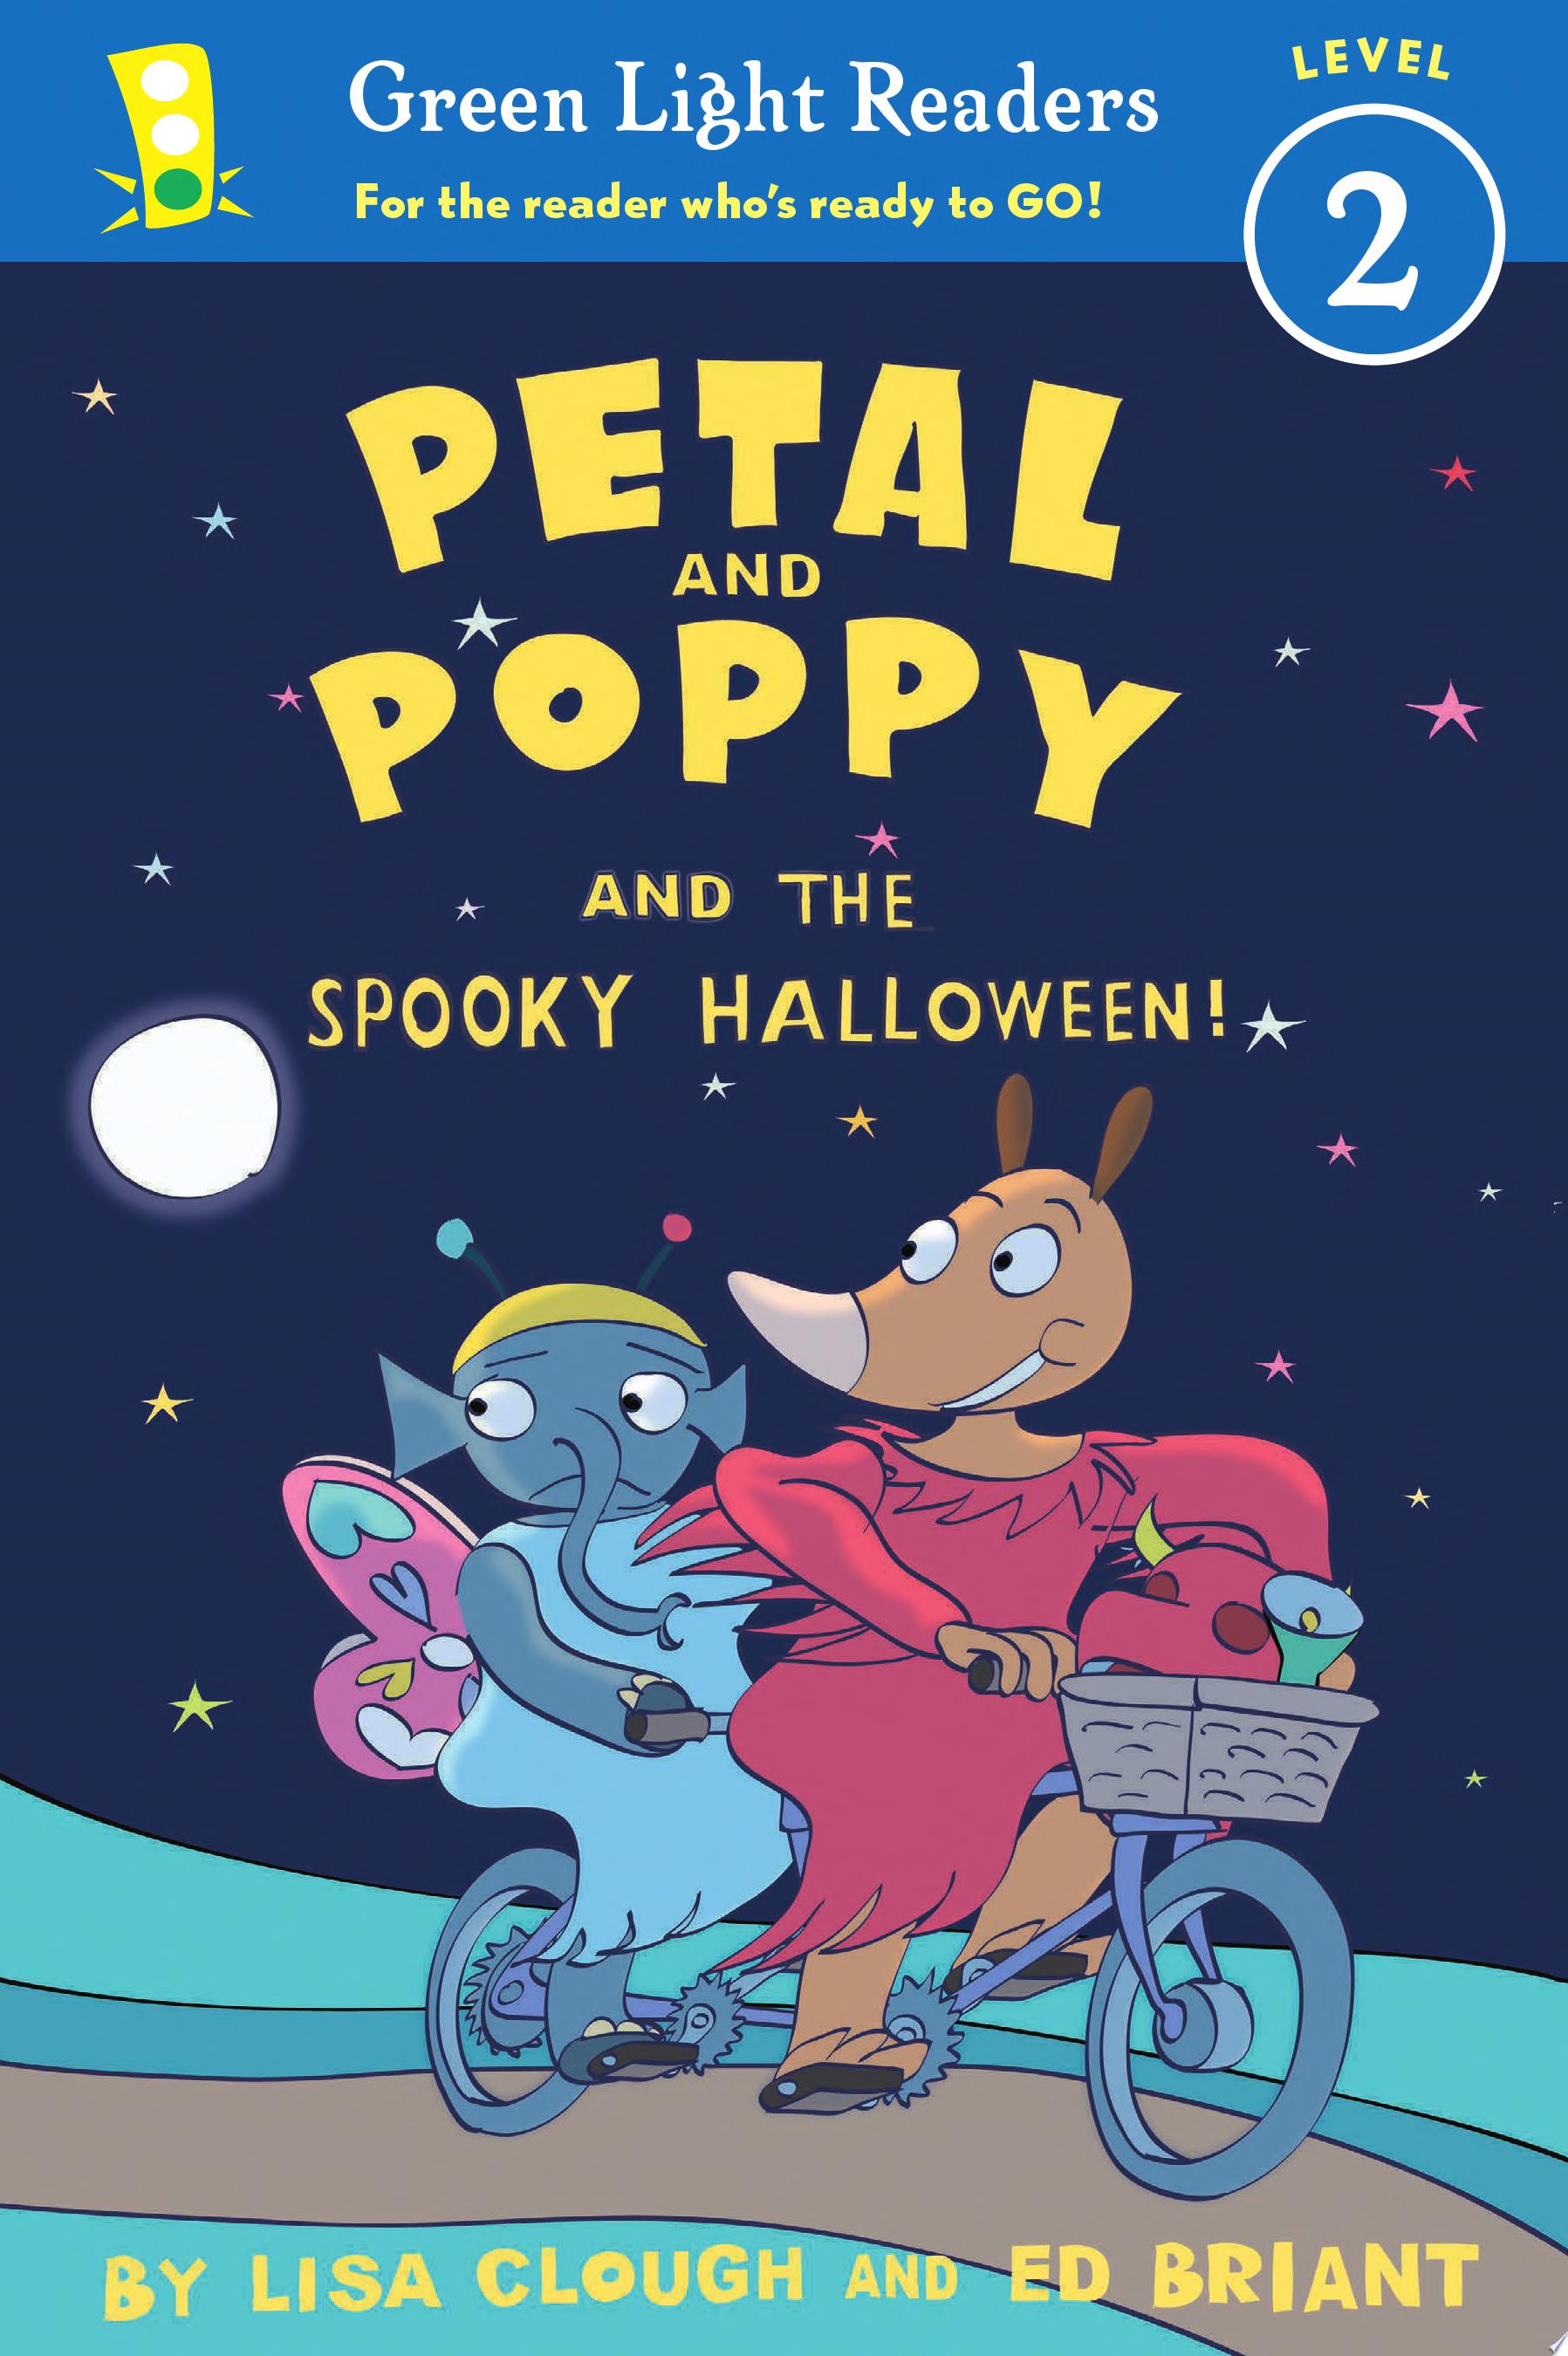 Image for "Petal and Poppy and the Spooky Halloween!"